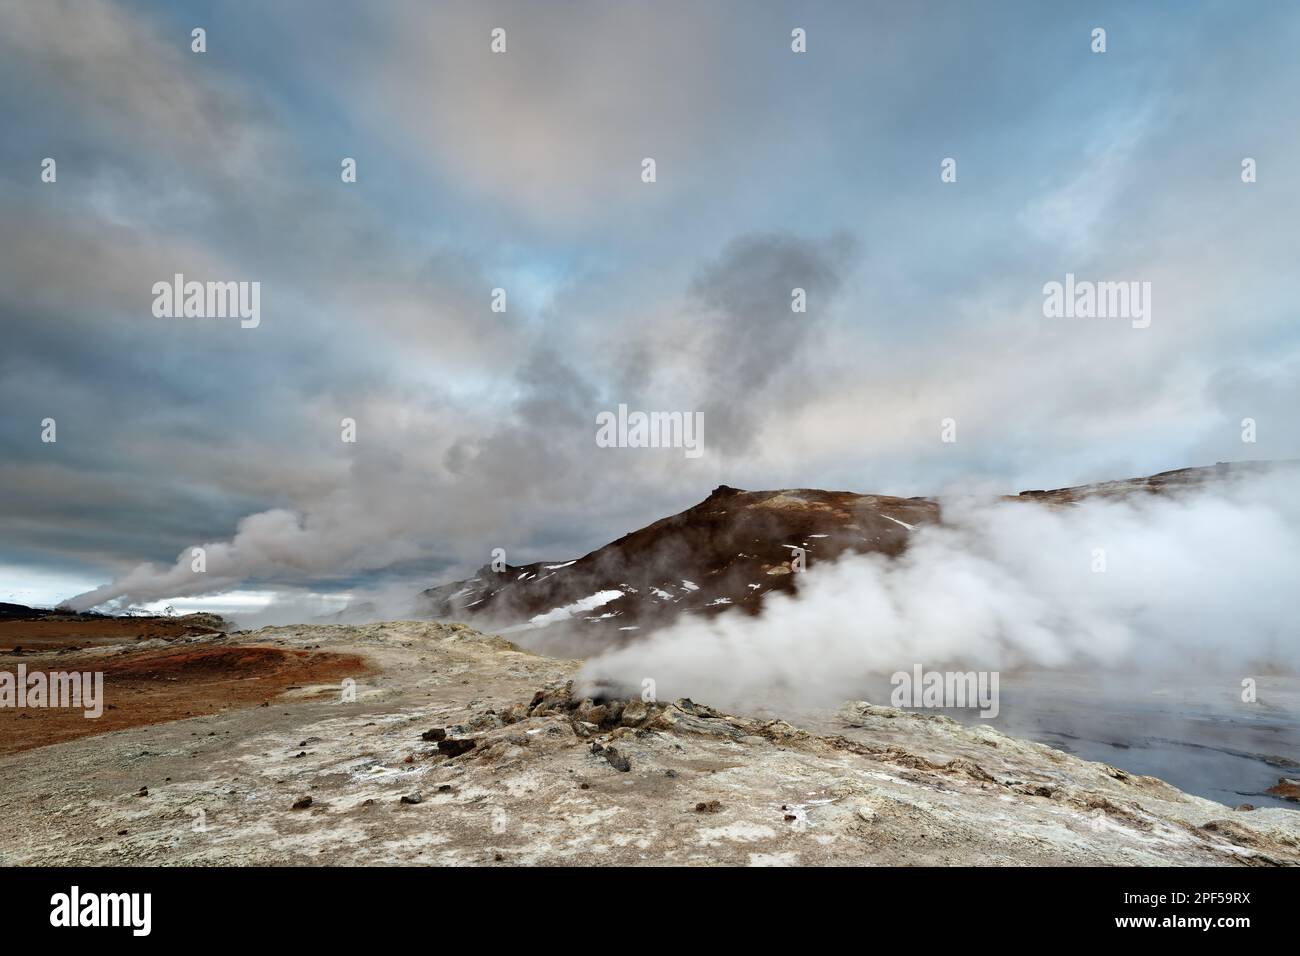 Wide volcanic landscape with steam escaping from fissures in the earth, blown sideways by the wind, above a sky with clouds coloured by the evening su Stock Photo